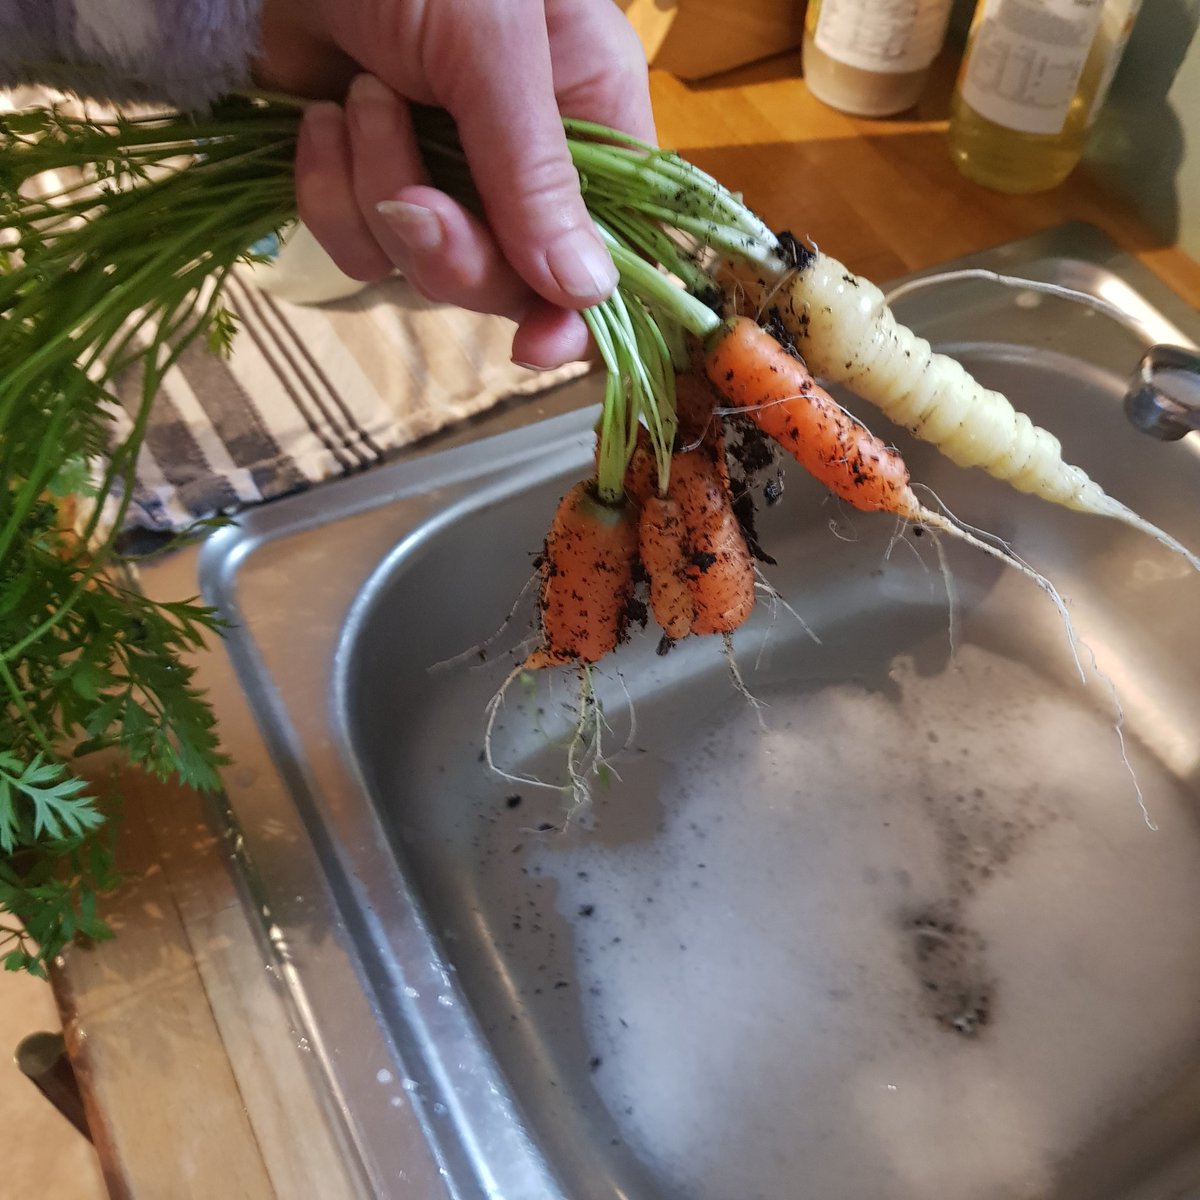 At least we saved some money on growing our own carrots and herbs I guess. 2/